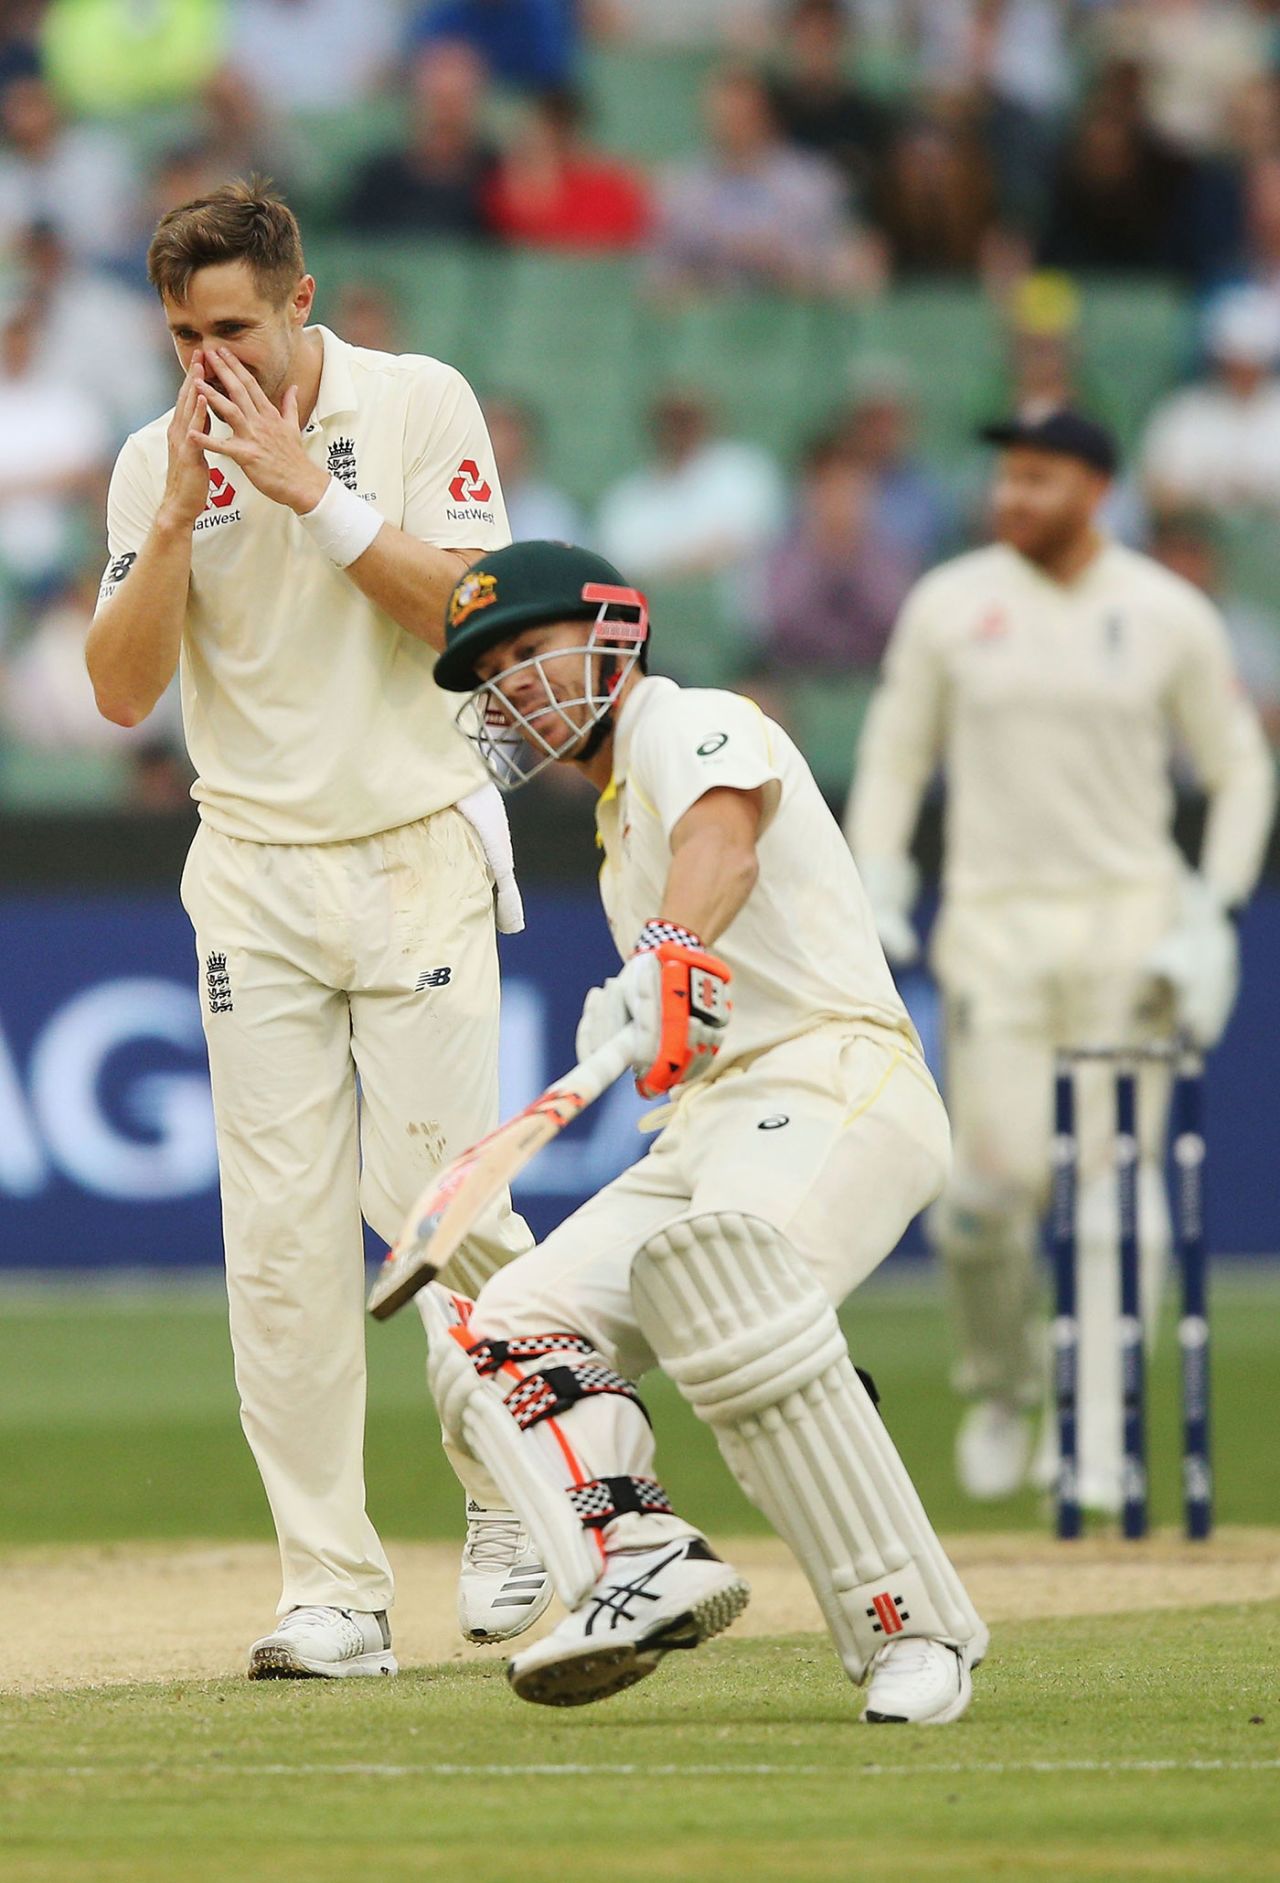 Chris Woakes reacts as David Warner spoons one over midwicket, Australia v England, 4th Ashes Test, Melbourne, 4th day, December 29, 2017